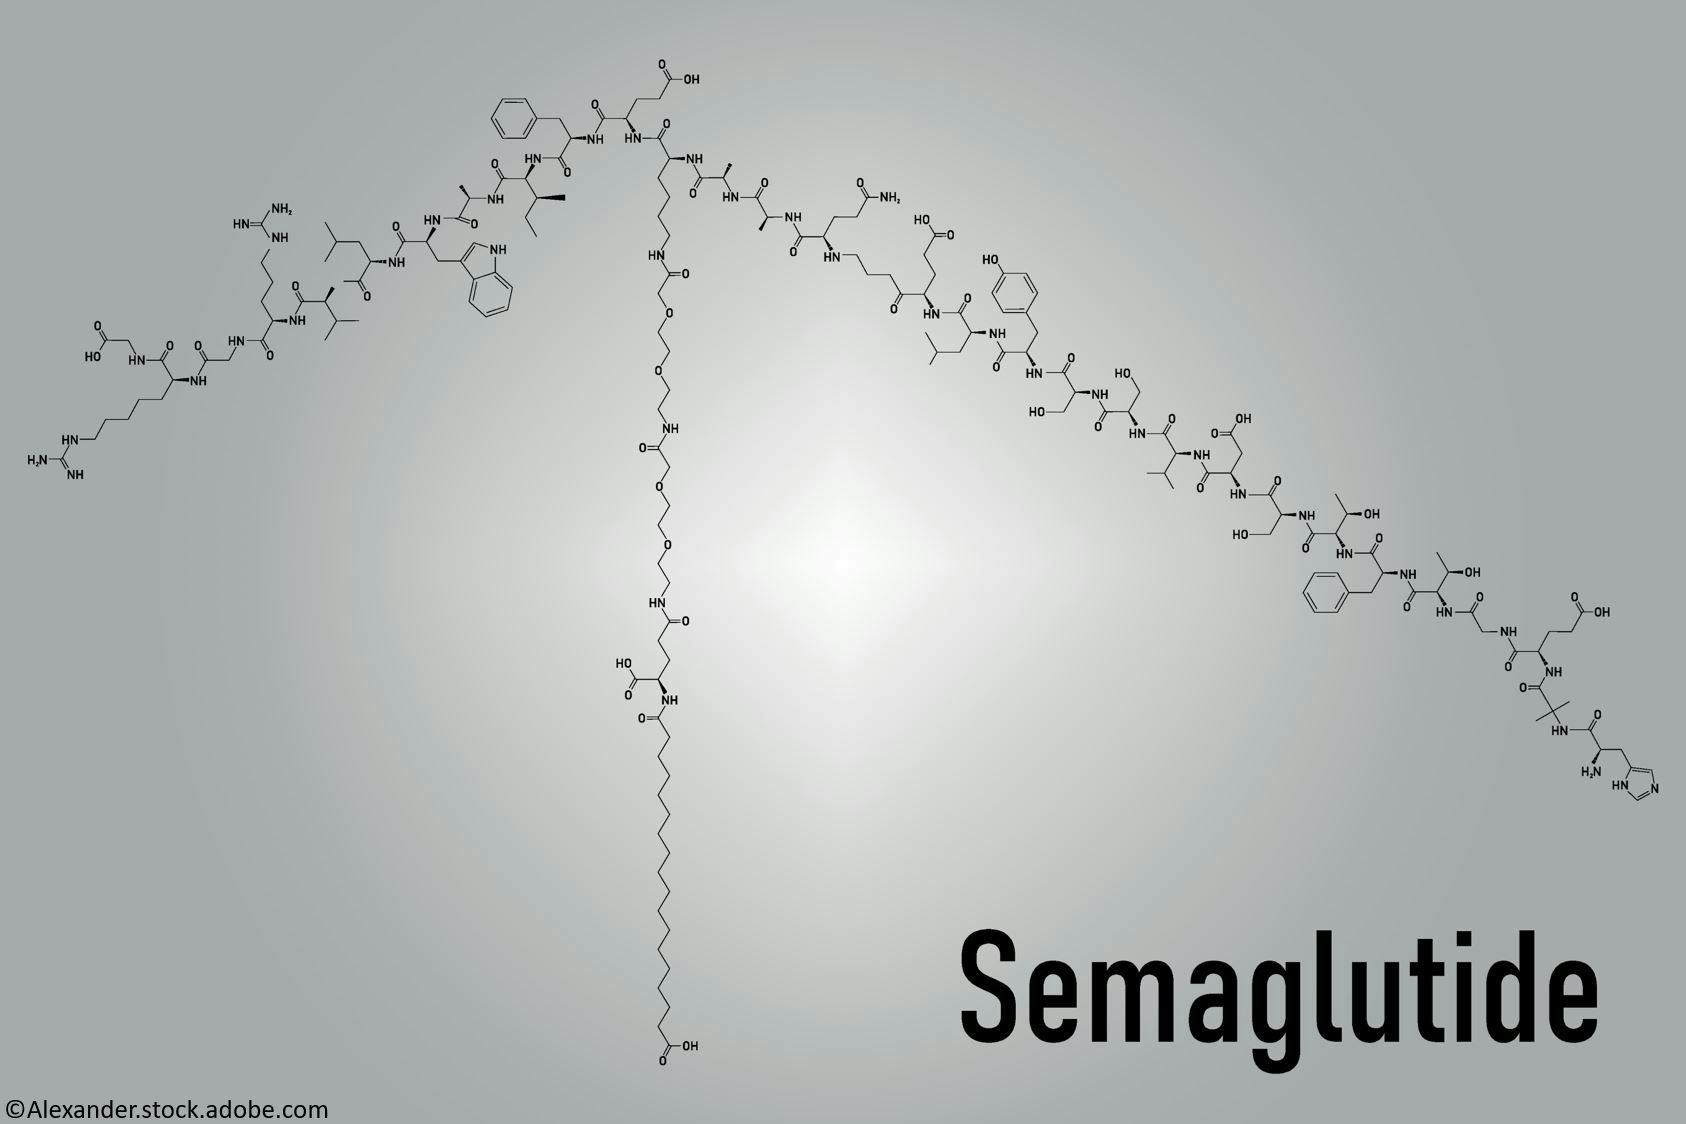 Semaglutide Cuts Cardiovascular Risk by 20% in Adults with Obesity, CVD and Without Diabetes